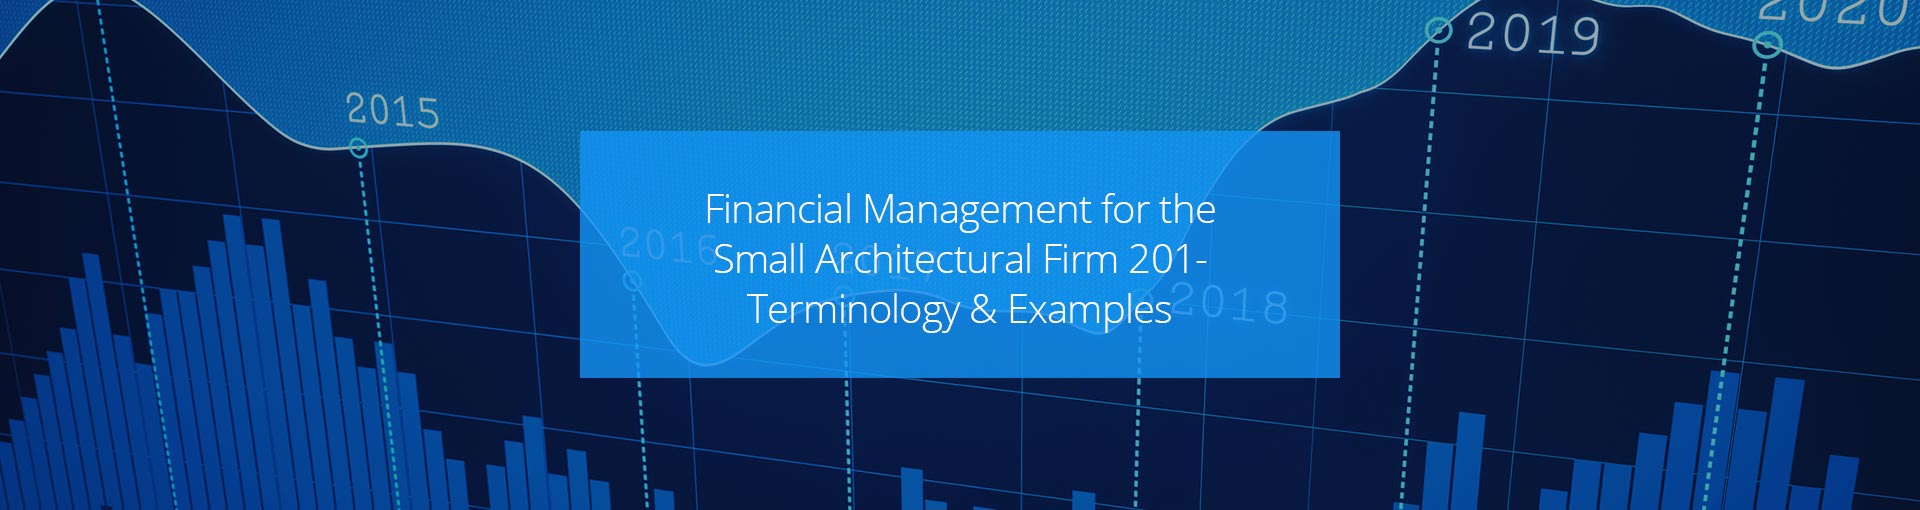 Financial Management for the Small Architectural Firms Featured Image